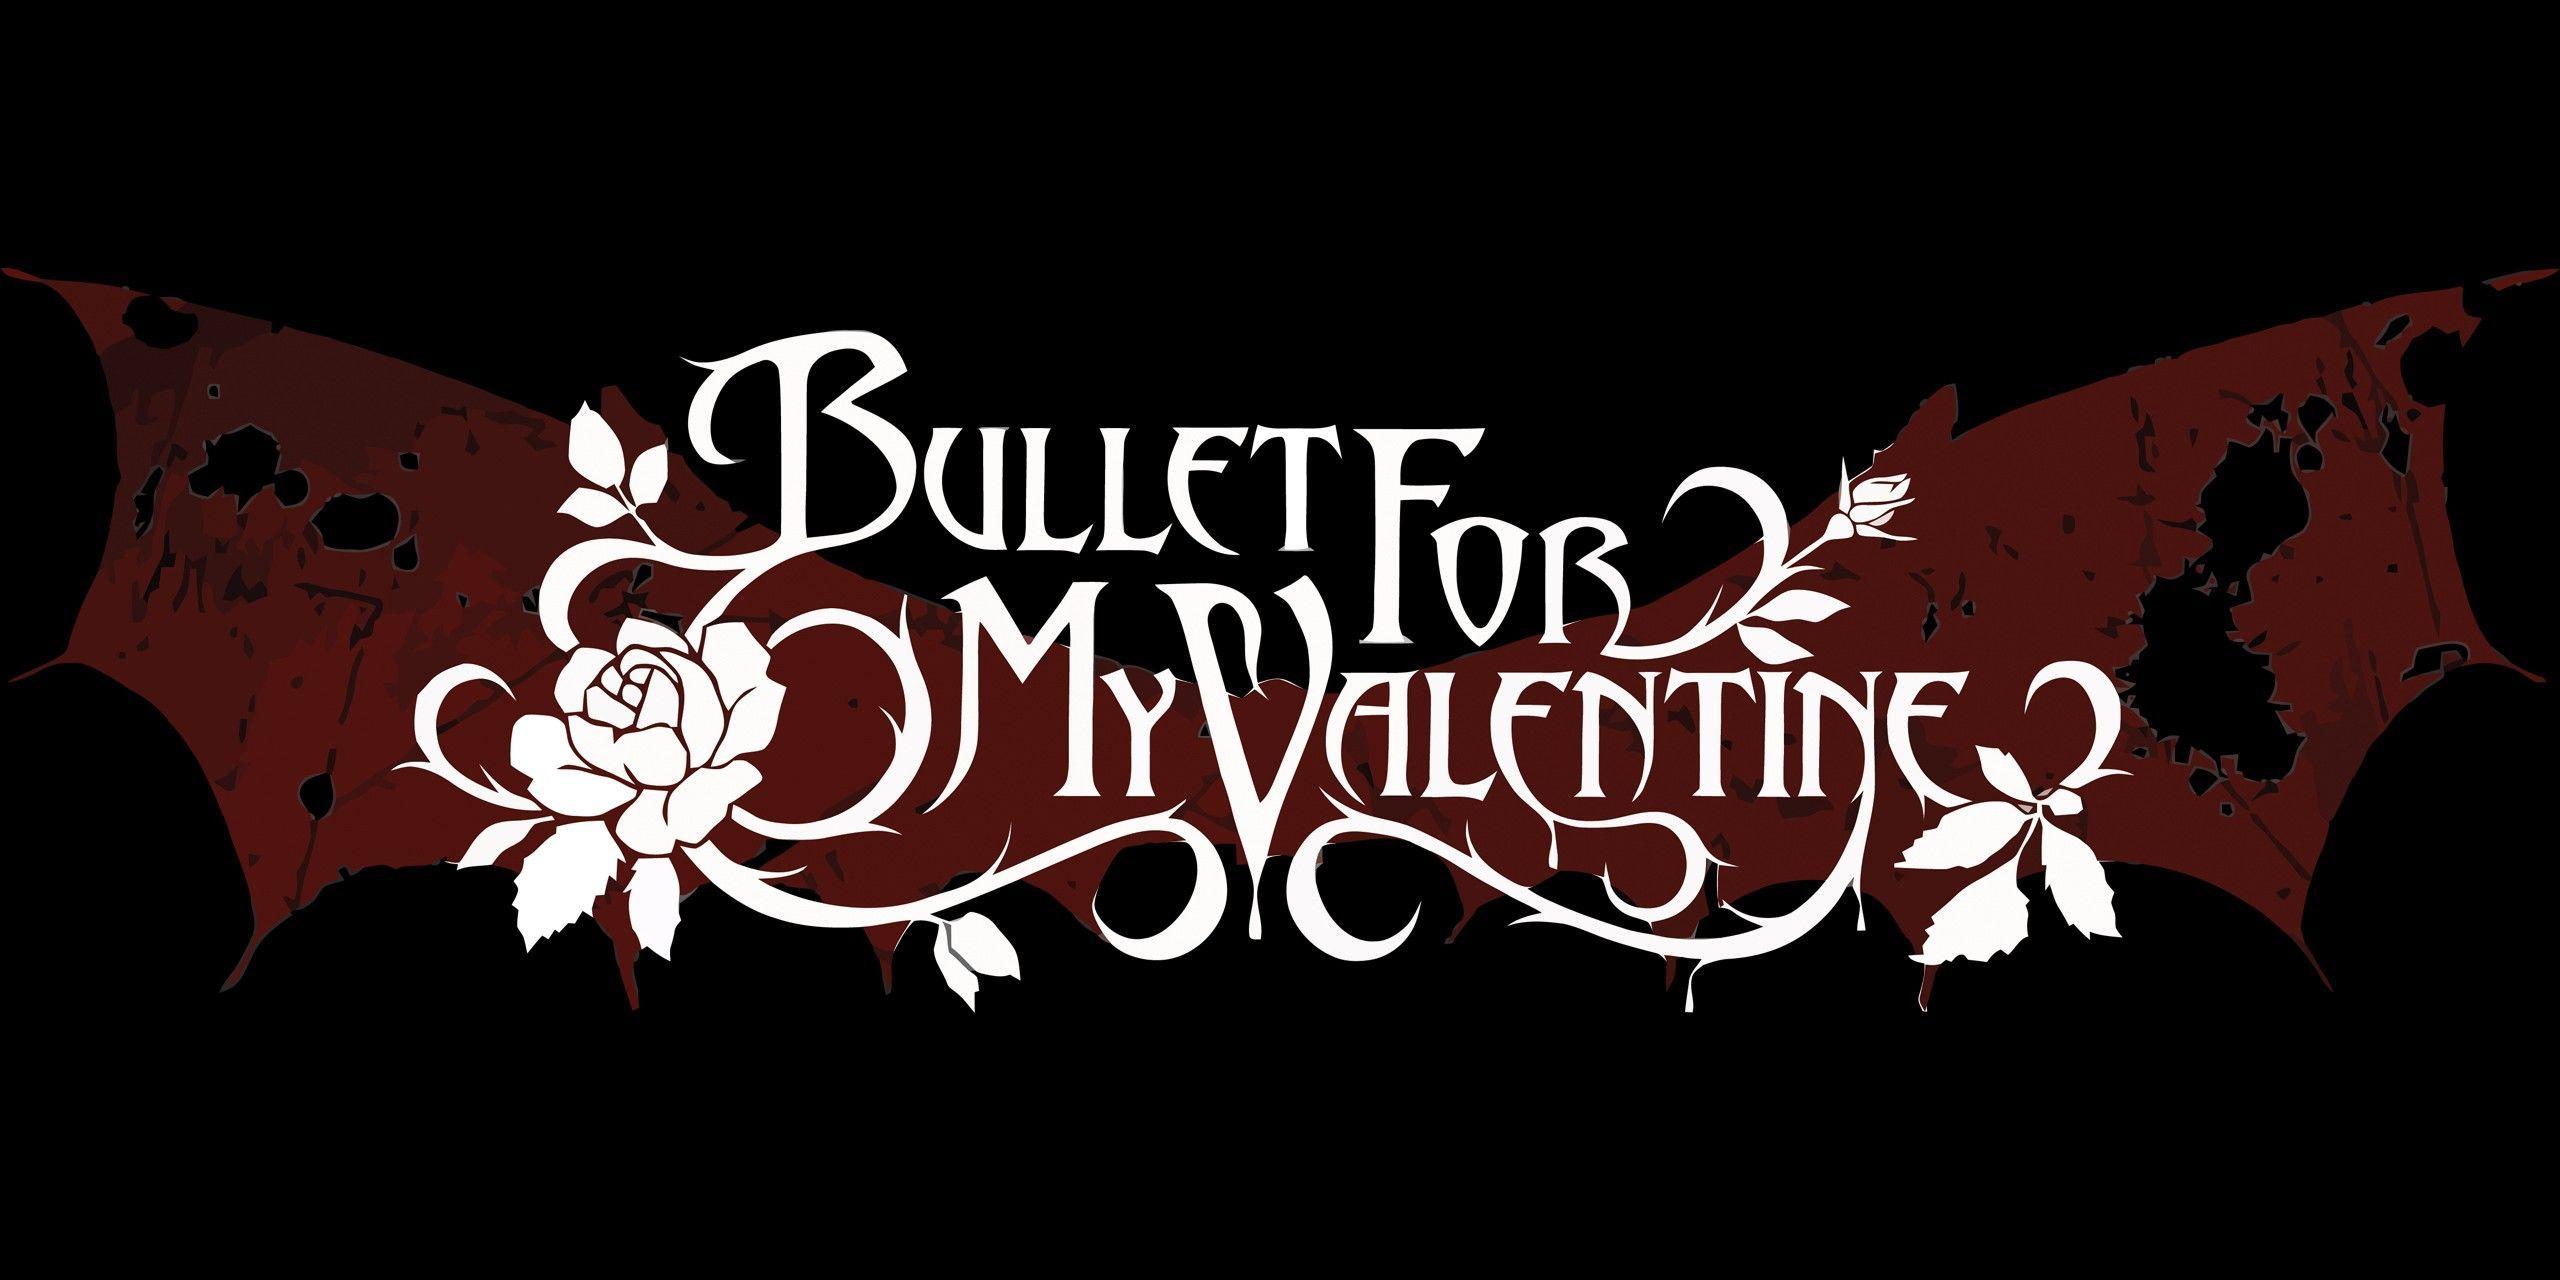 Bullet for My Valentine Logo - Bullet For My Valentine Logo | Worms Reloaded Maps | photos in 2019 ...